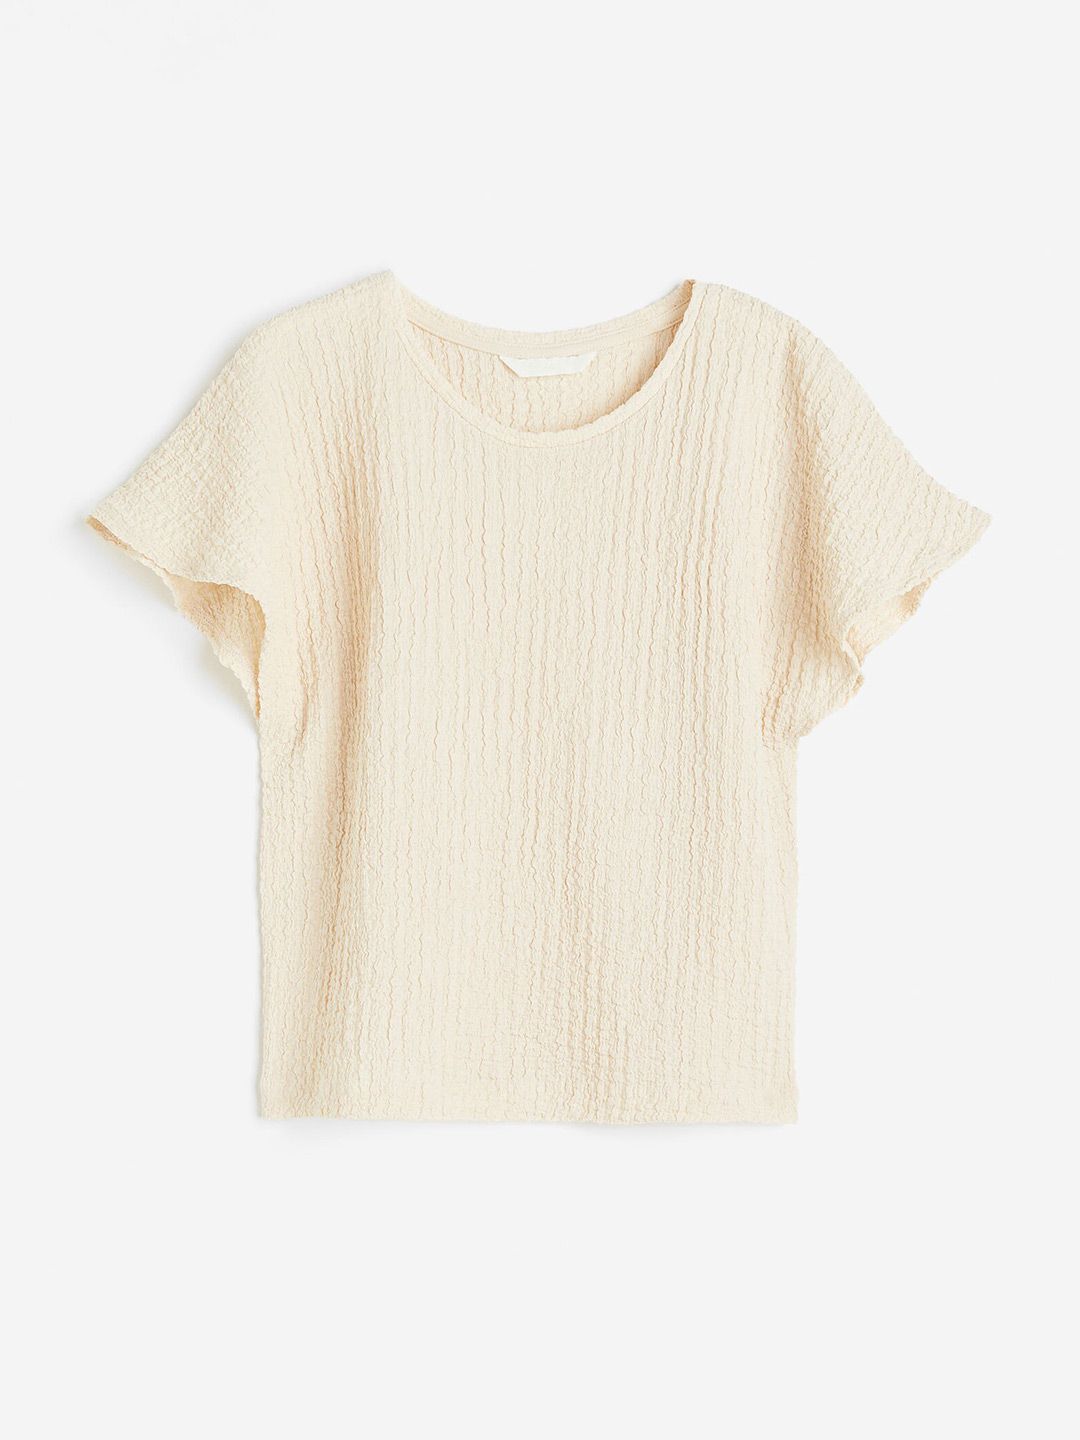 H&M Women Textured Jersey Top Price in India